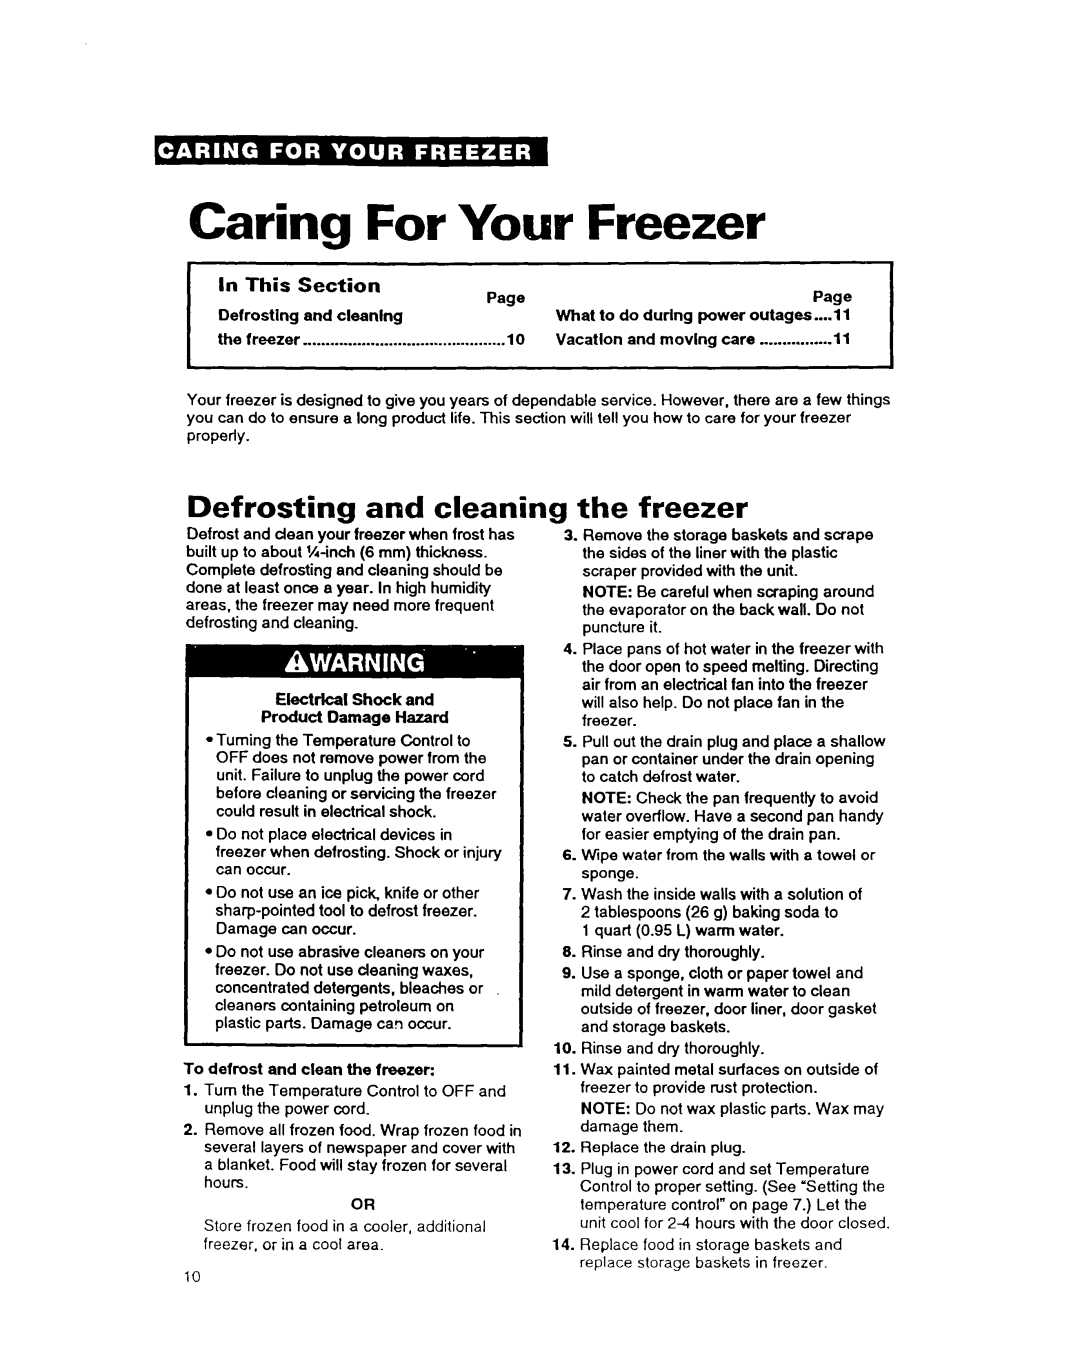 Whirlpool COMPACT FREEZER warranty Caring For Your Freezer, Defrosting and cleaning, the freezer, This, Section 